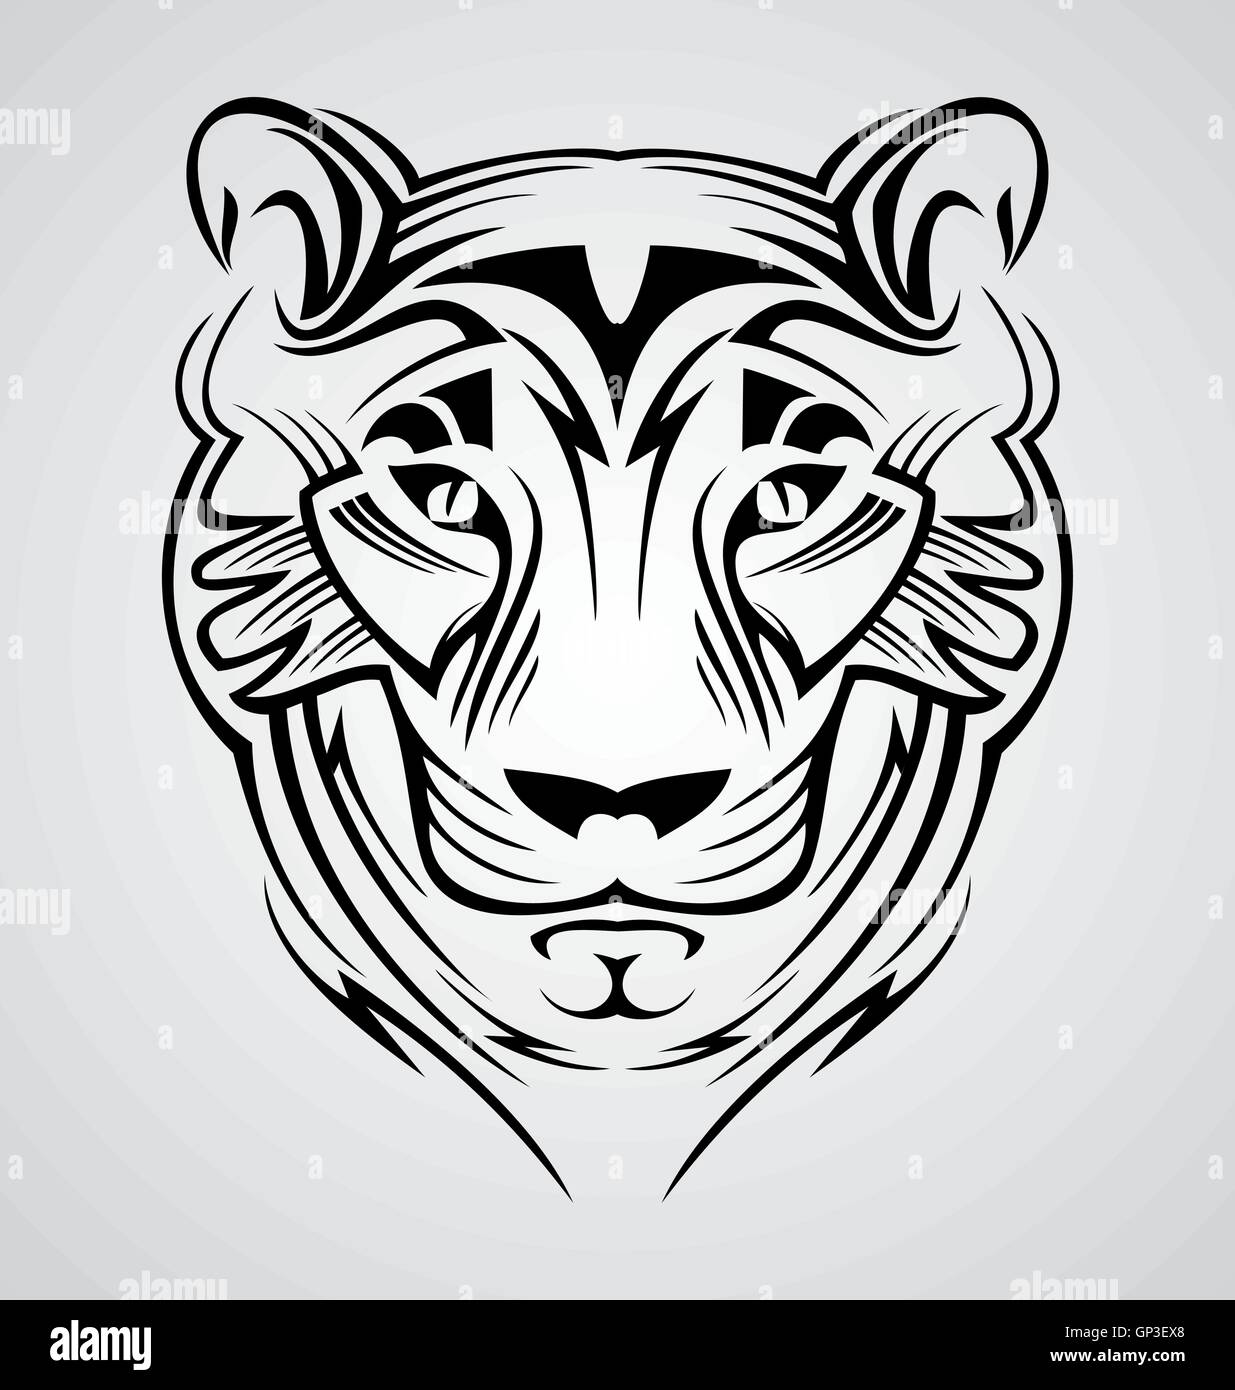 Tigers head tattoo Stock Vector Images - Alamy